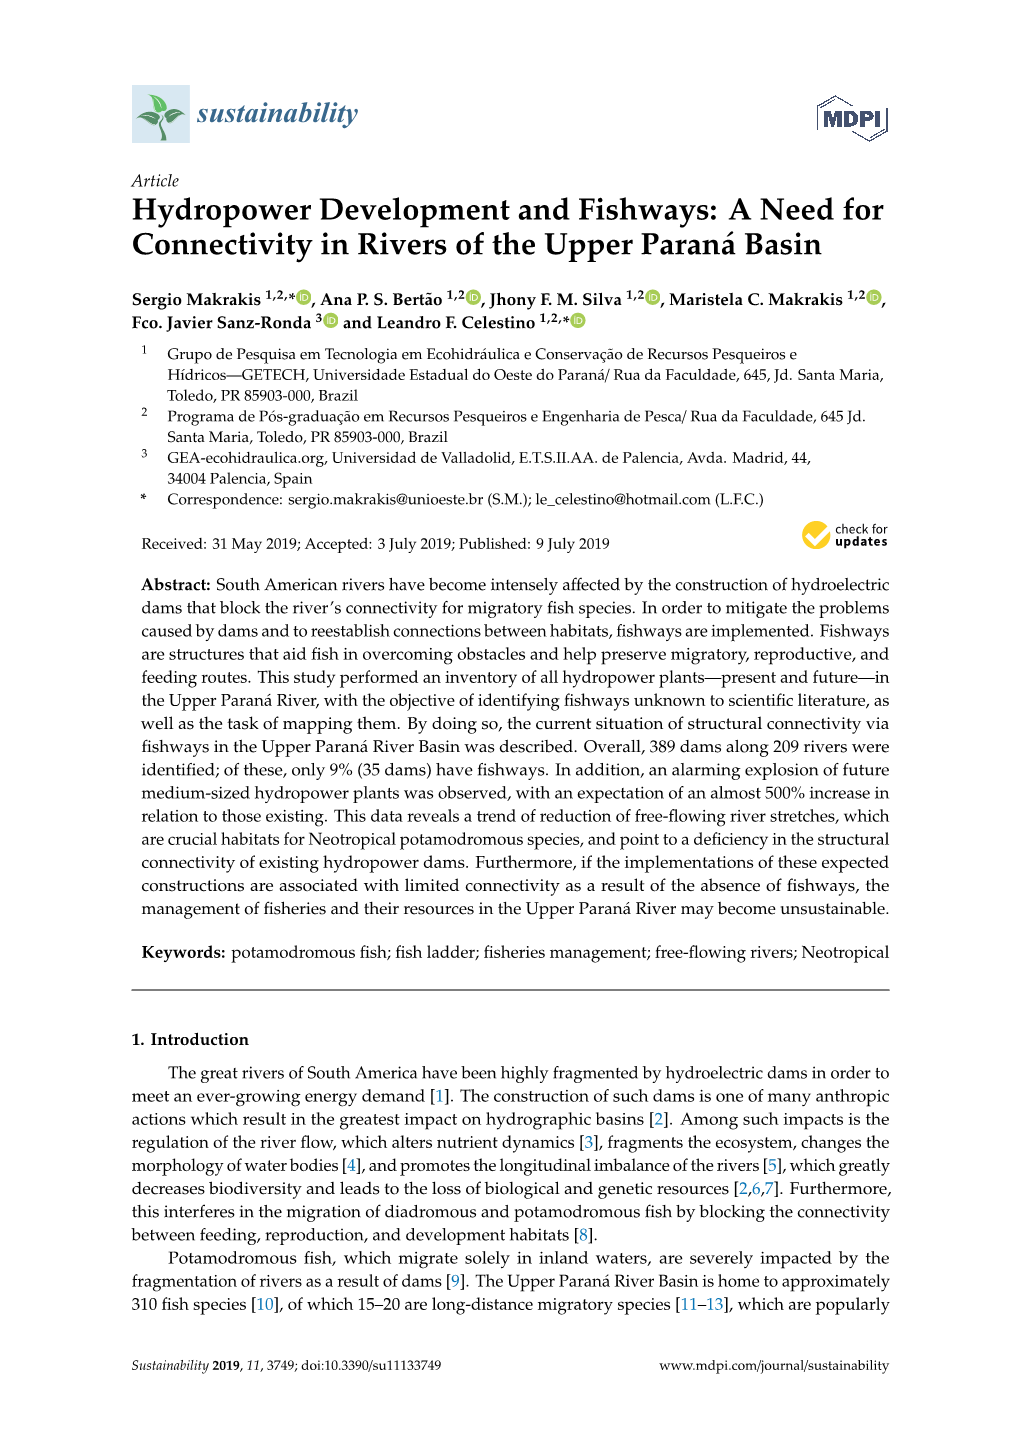 Hydropower Development and Fishways: a Need for Connectivity in Rivers of the Upper Paraná Basin